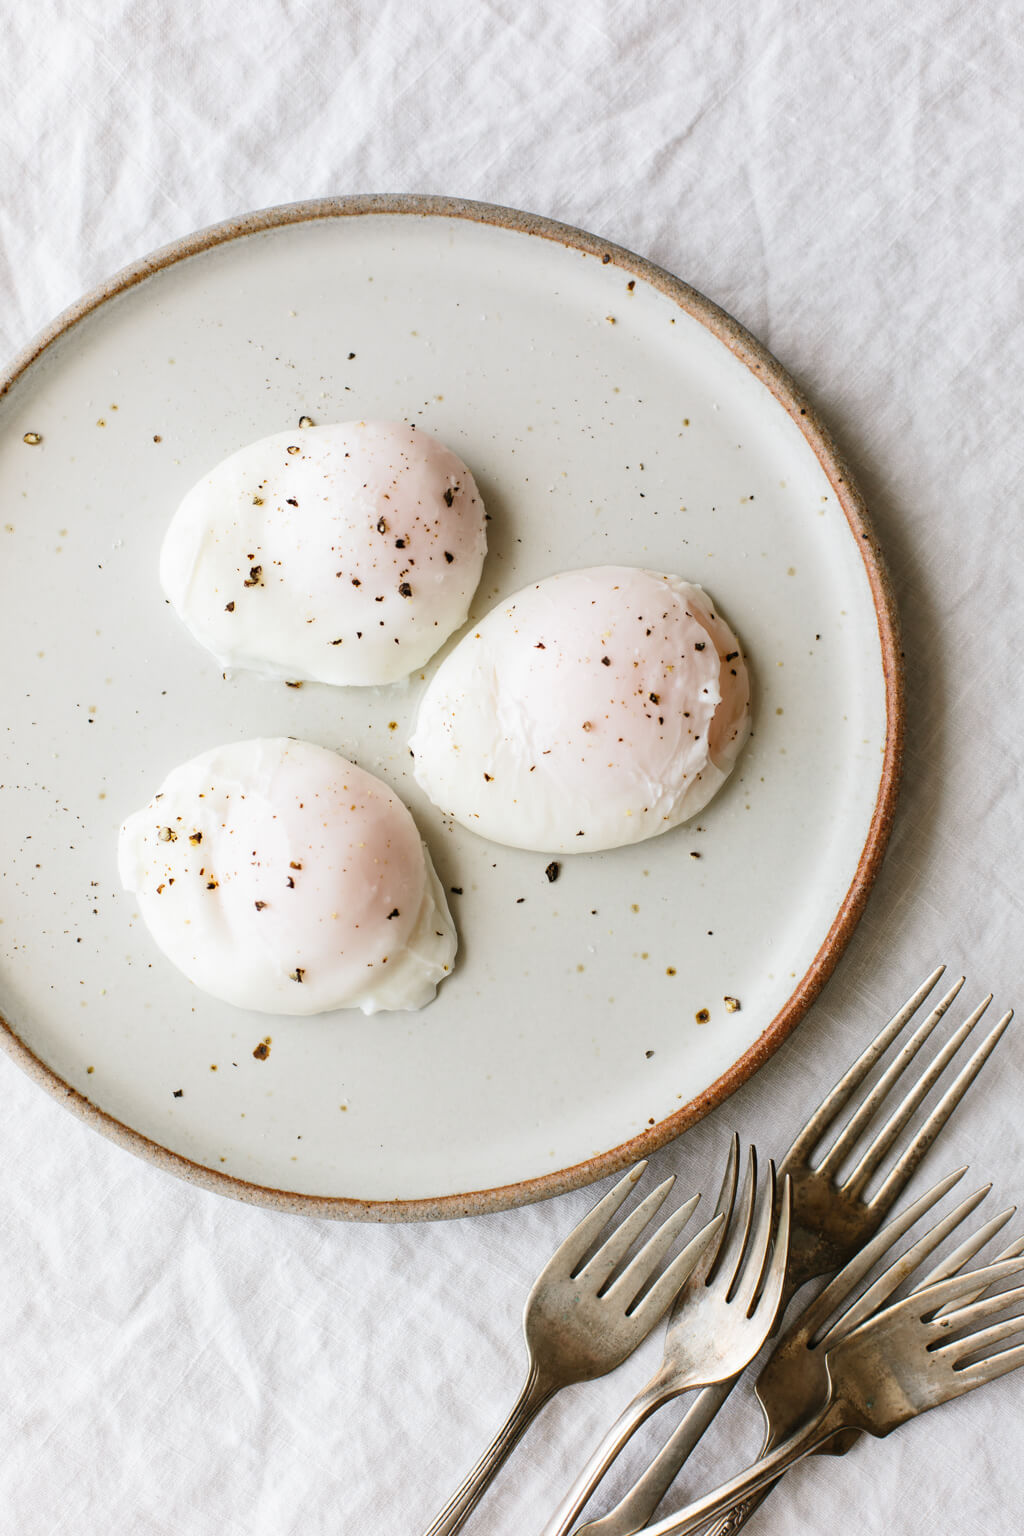 Poached Eggs are the perfect healthy breakfast recipe. Here's how to poach an egg perfectly every time. 